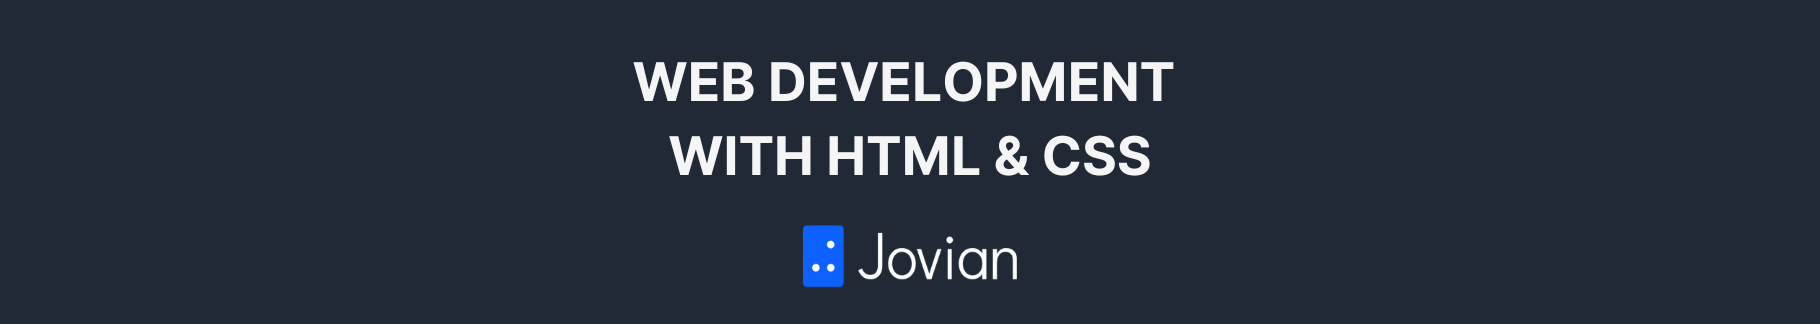 Web Development with HTML and CSS